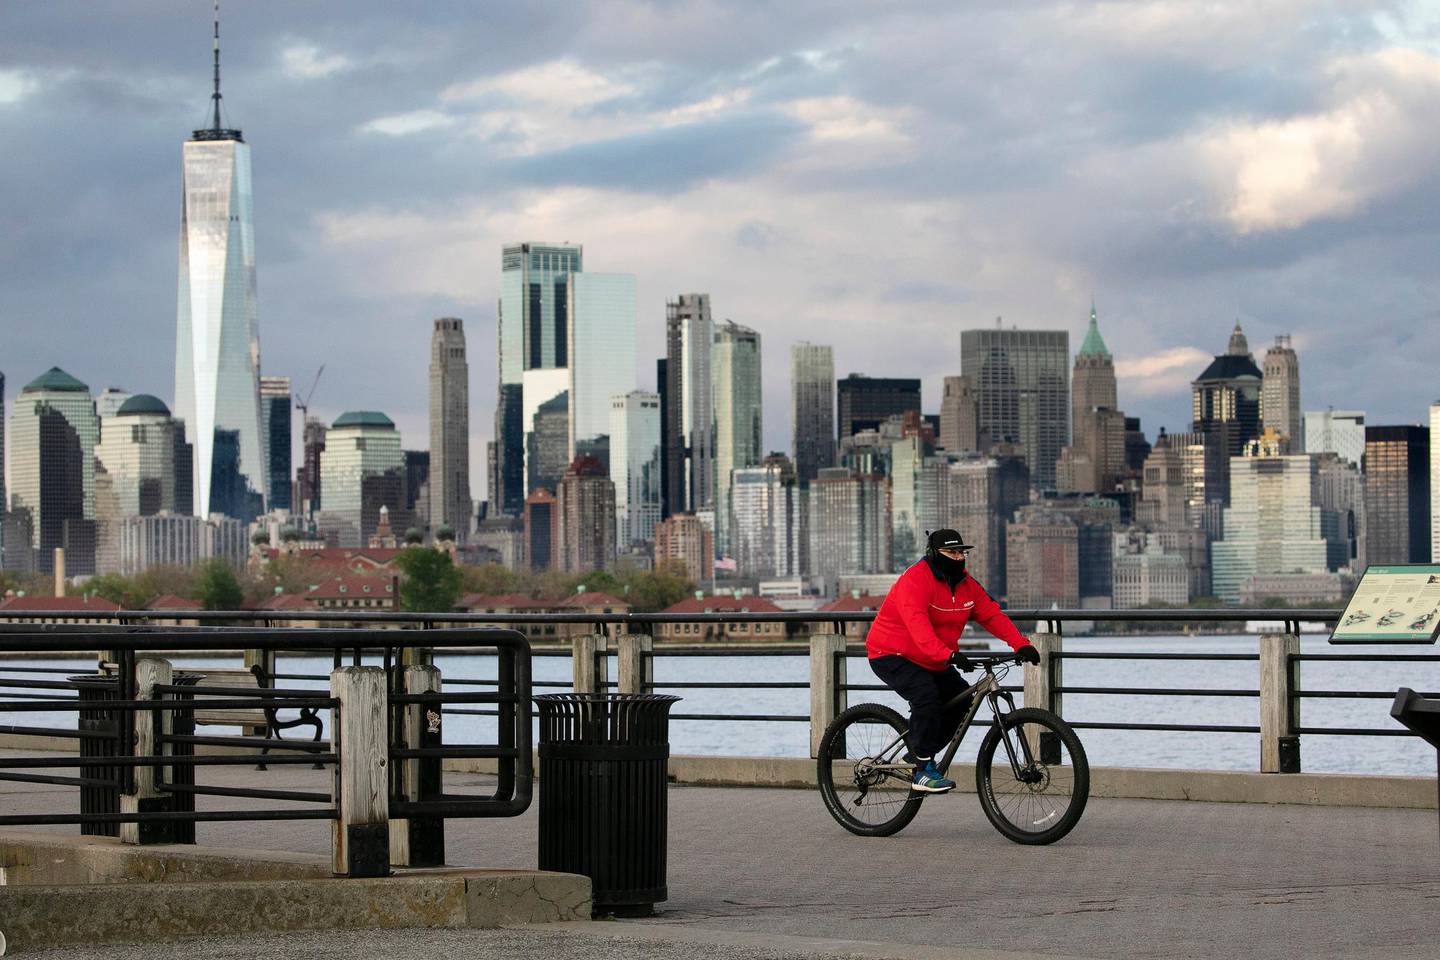 A cyclist wears a mask as he bikes in Liberty State Park, Monday, May 11, 2020, in Jersey City, N.J., during the coronavirus pandemic. Behind him is some of the New York skyline. Gov. Phil Murphy said on Monday that New Jersey will soon have what he called "hard dates" for the start of the reopening process. (AP Photo/Mark Lennihan)